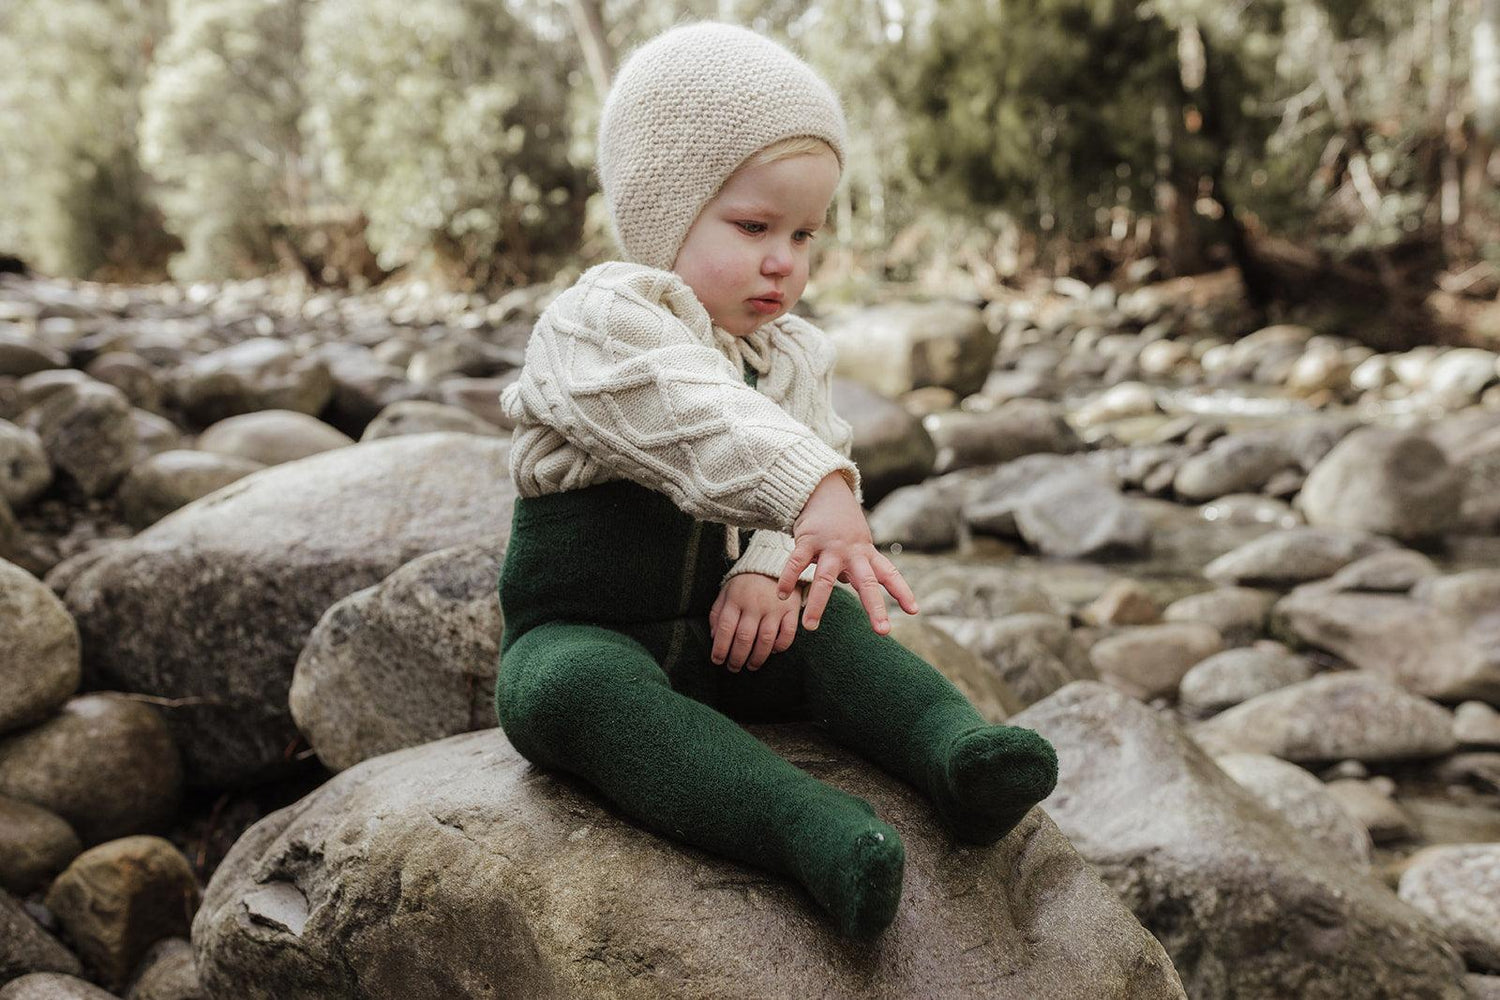 Strumpfhose Teddy Warmy Footed 'Dark Forest Green' - The Little One • Family.Concept.Store. 